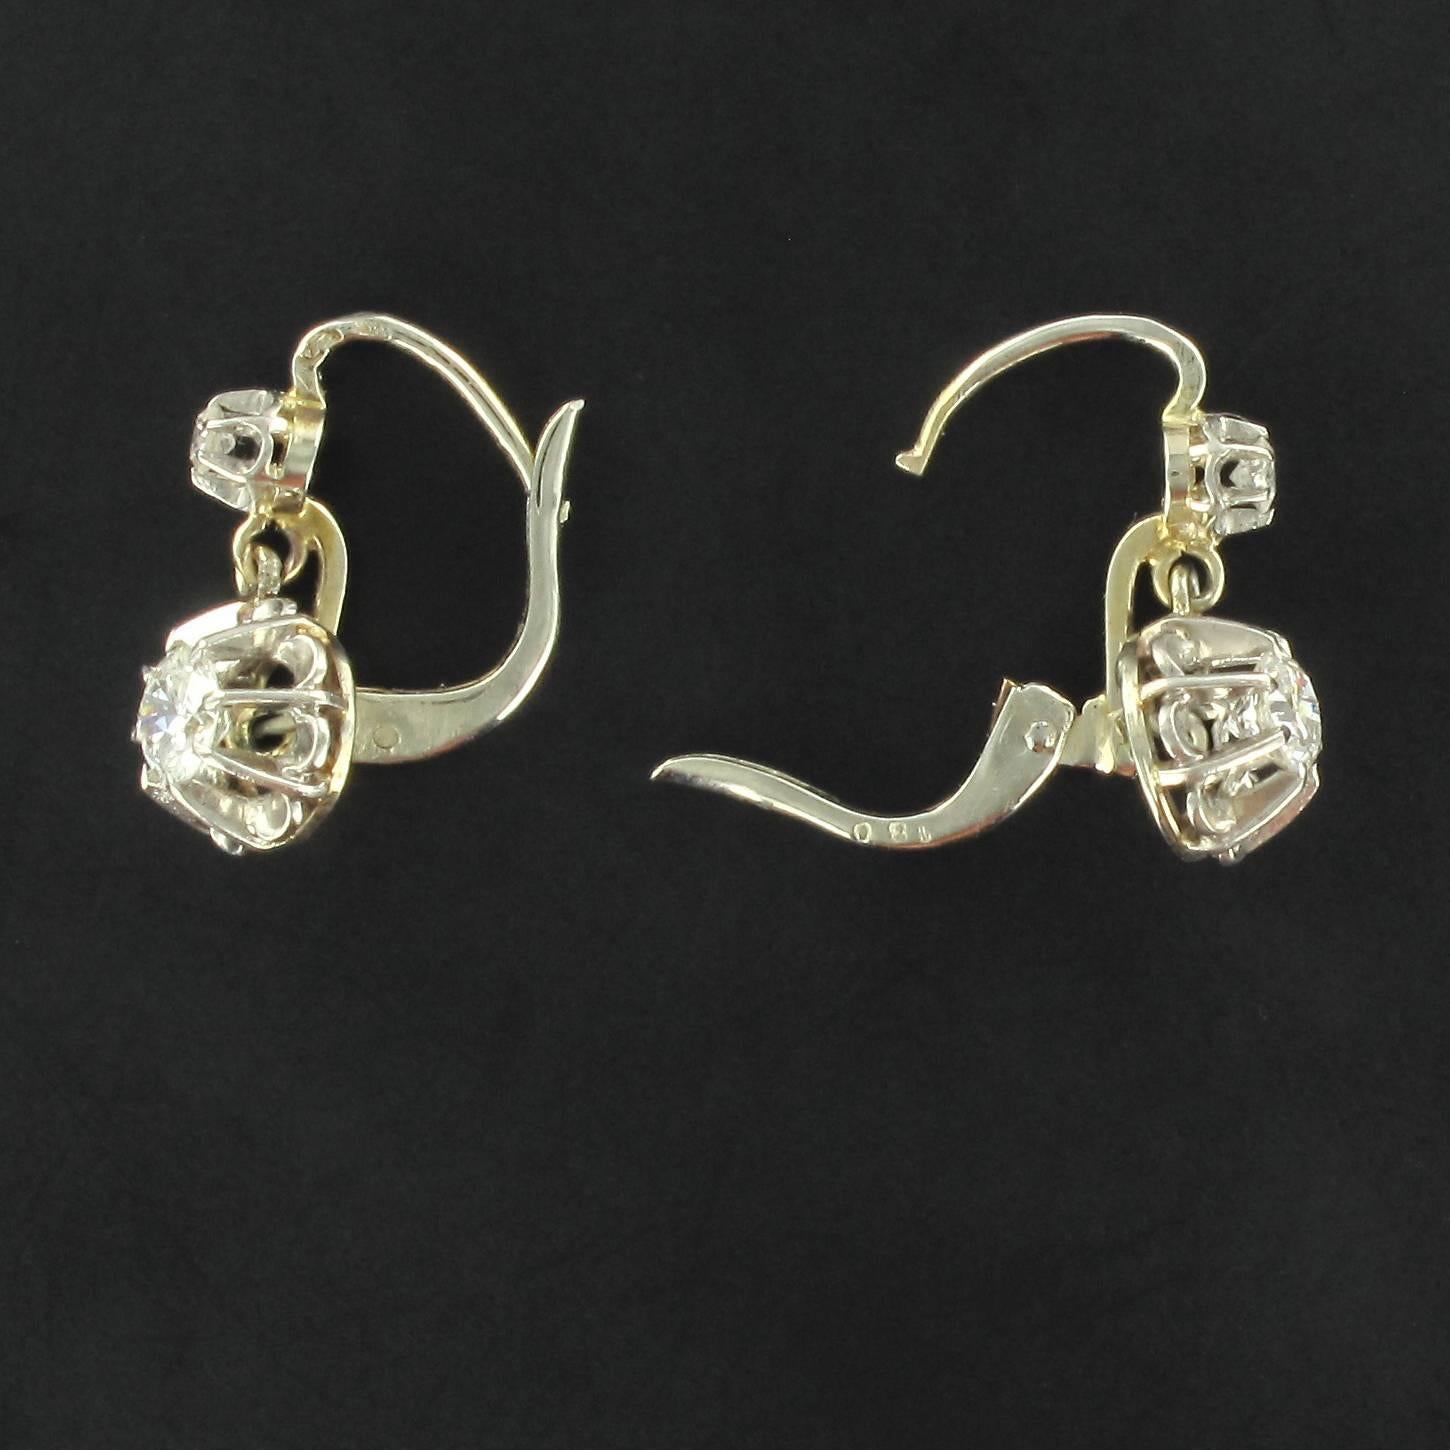 For pierced ears.
Pairs of earrings in 18 carat white gold, eagle head hallmark. 

Each diamond earring features a claw set brillant cut diamond from which is suspended a much larger brillant cut diamond in an illusional setting. The clasp closes at